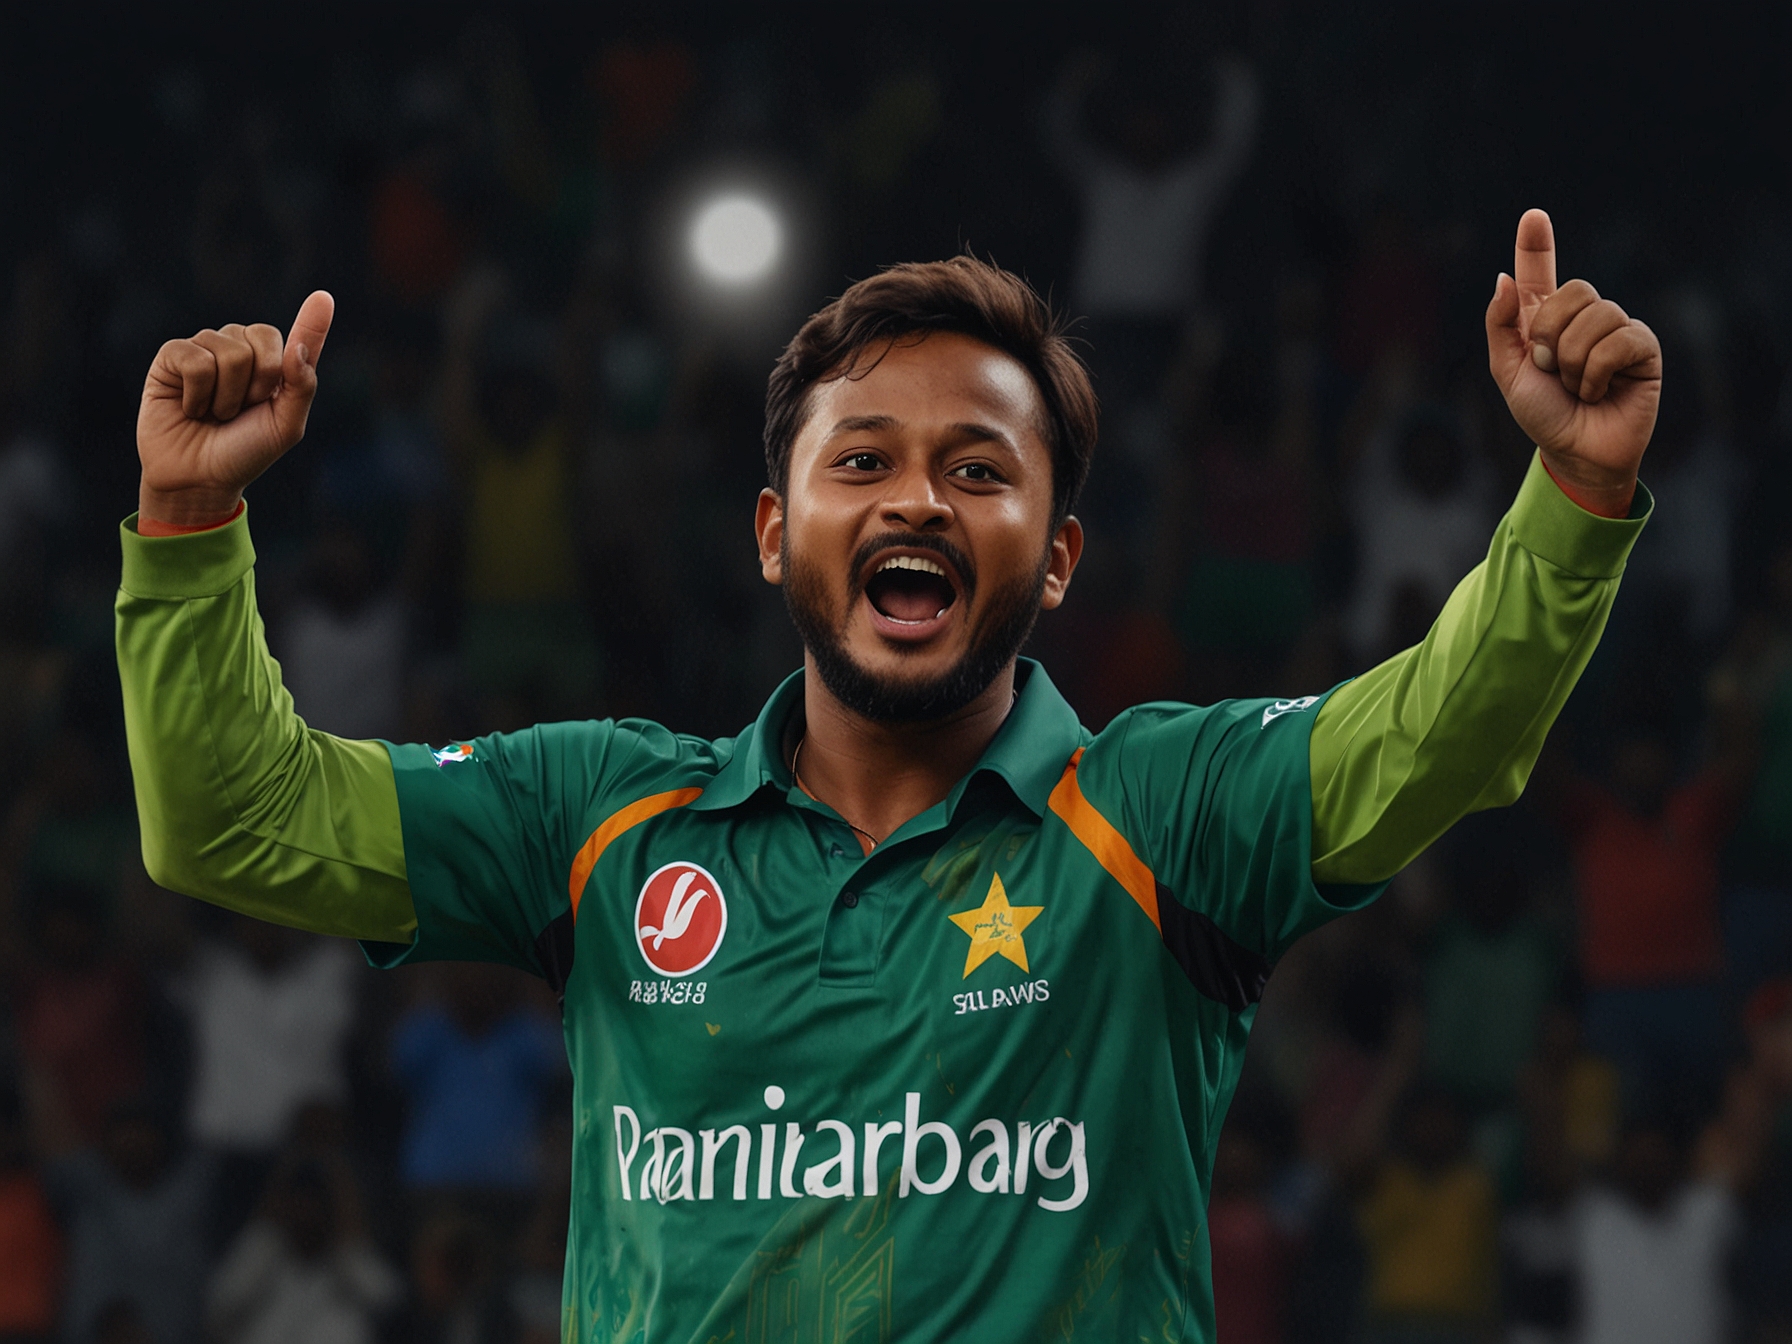 Shakib Al Hasan celebrates after taking his 50th T20 World Cup wicket against India, a historic moment showcasing his remarkable cricketing skills and consistent performance.